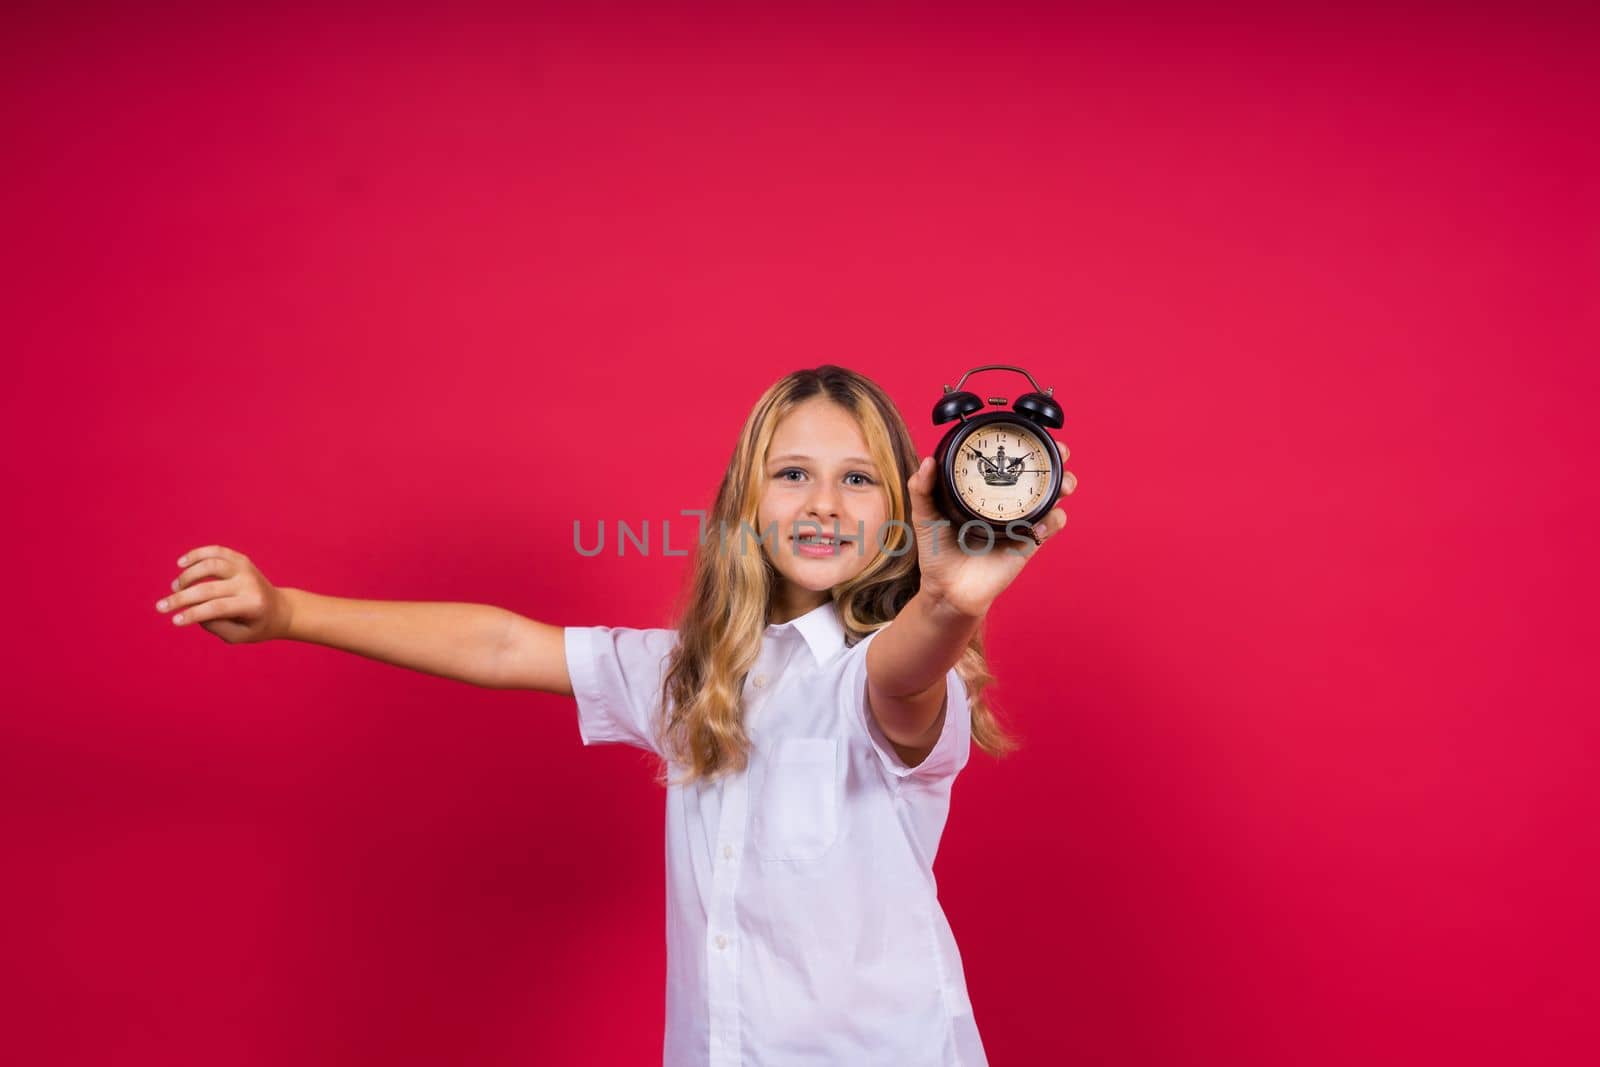 Young Girl holding an antique clock over red background by Zelenin